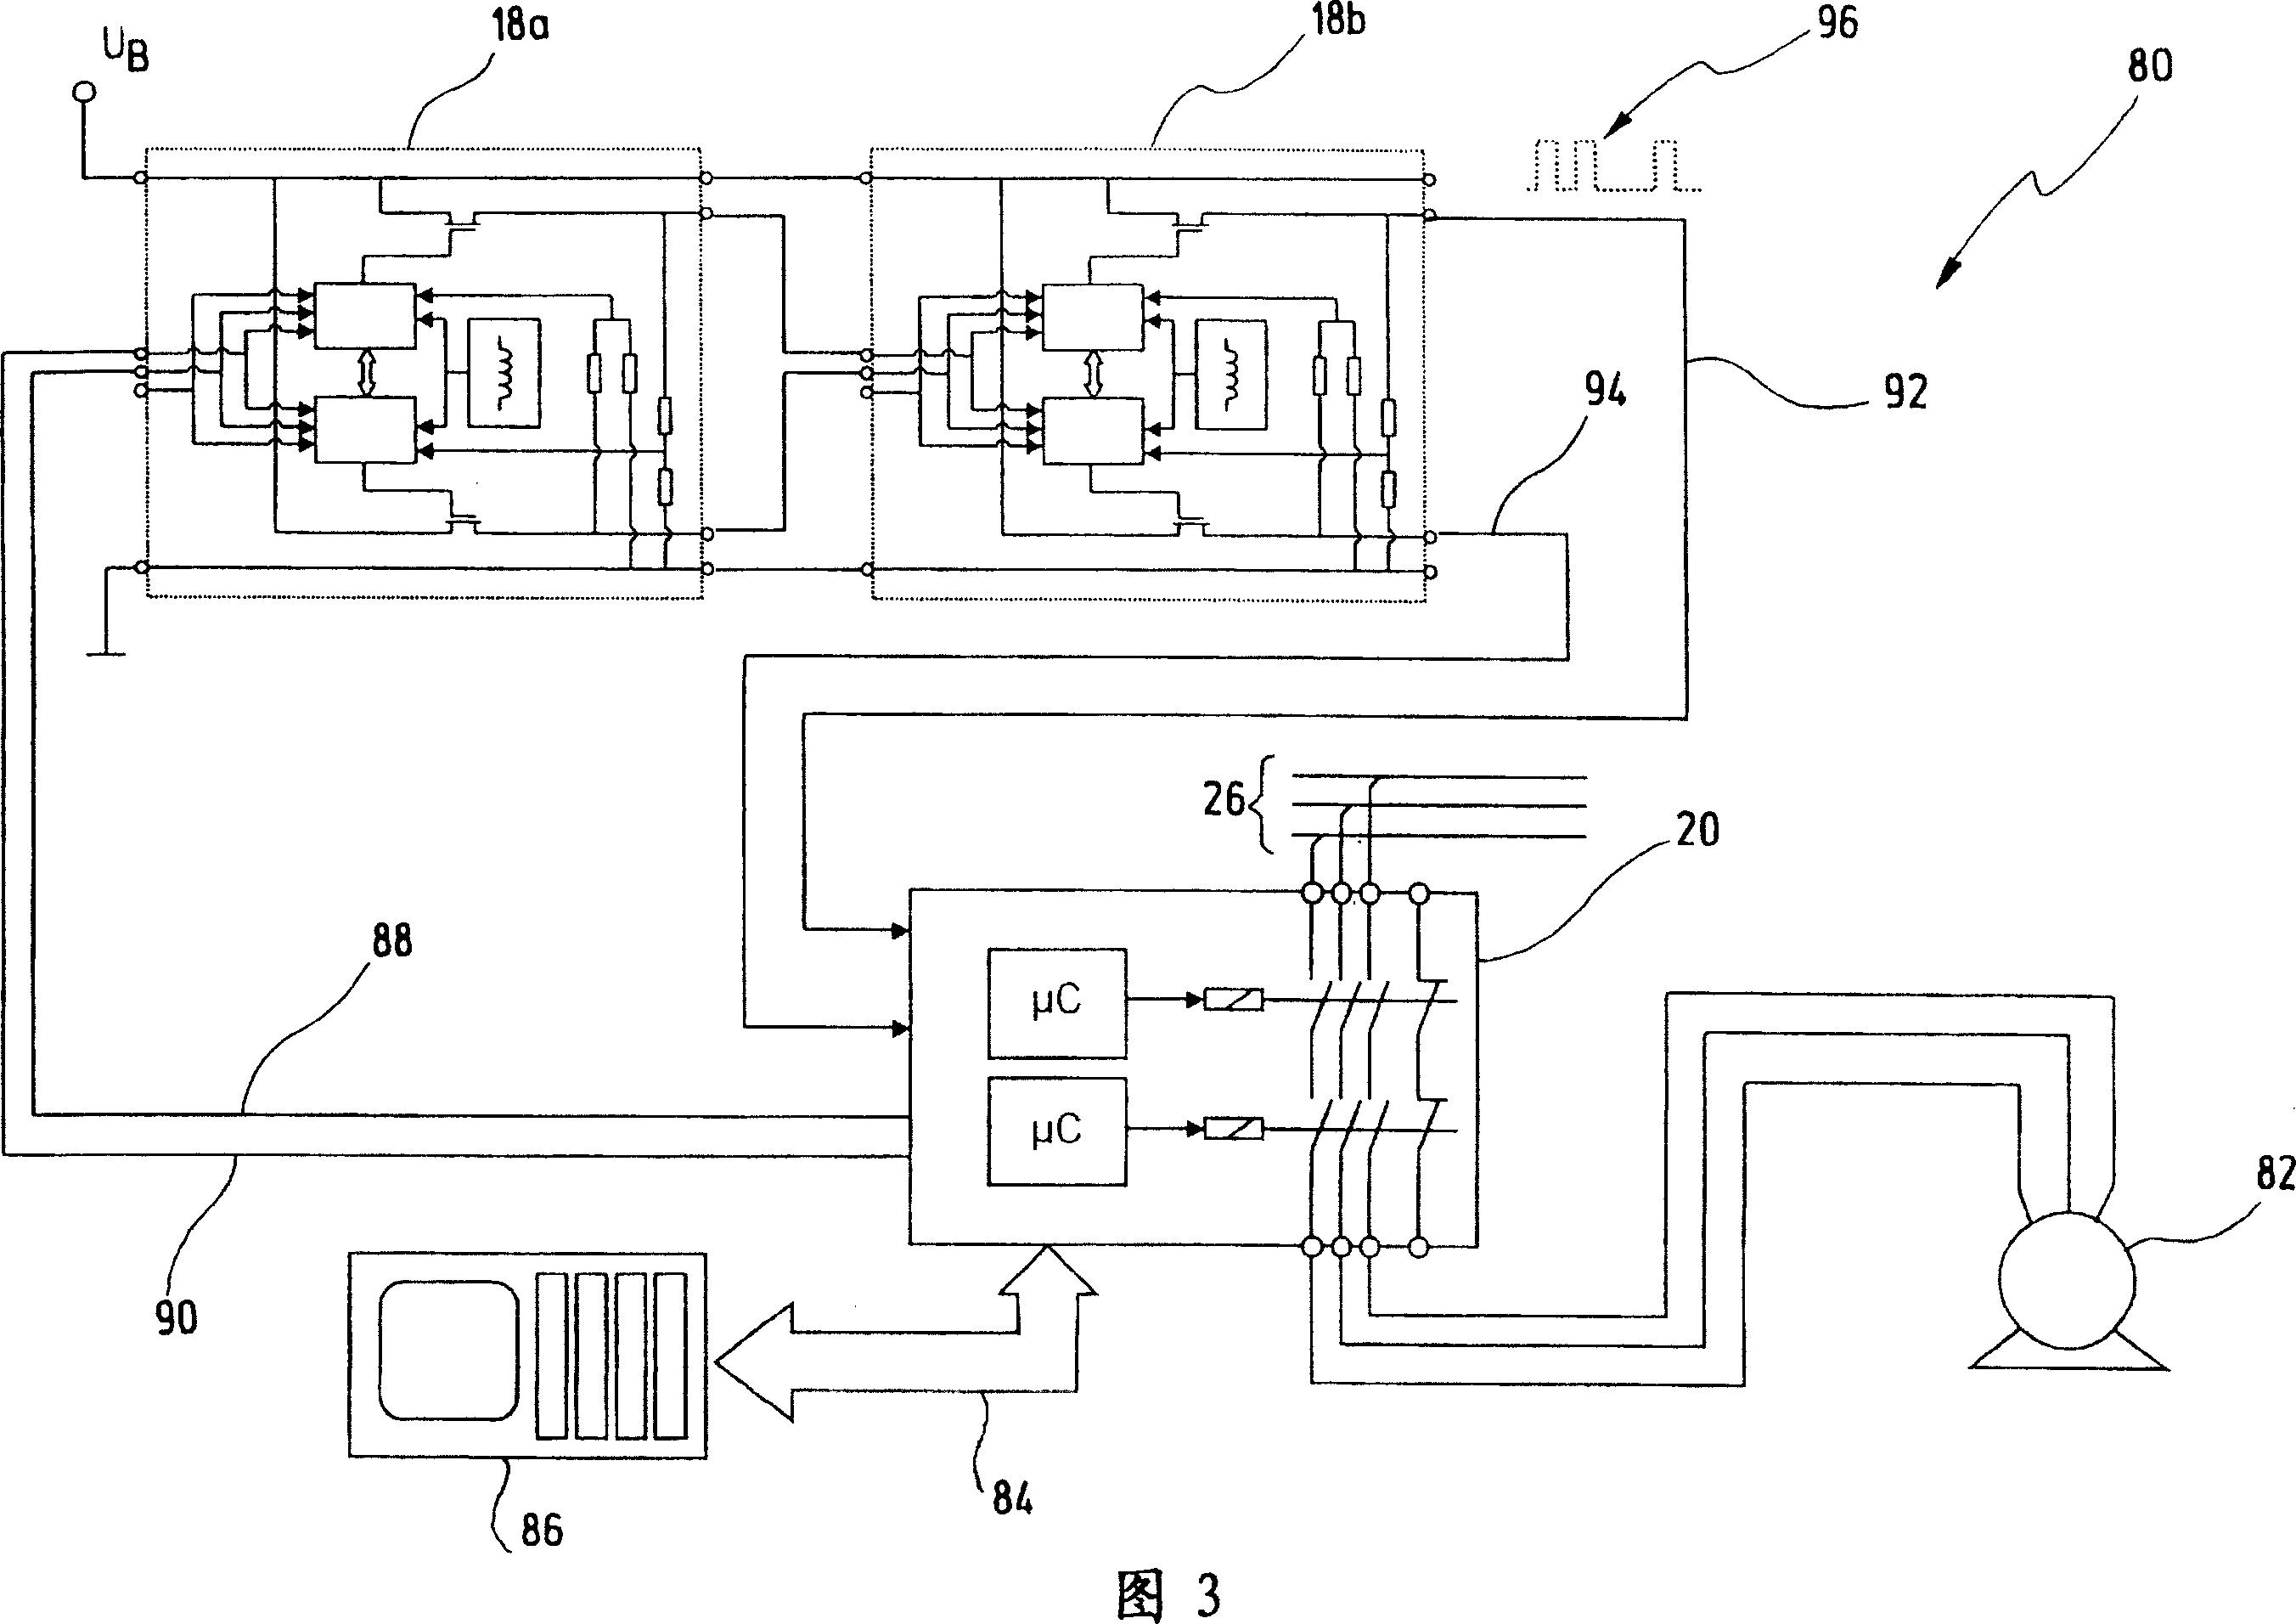 Signaling device for a safety circuit